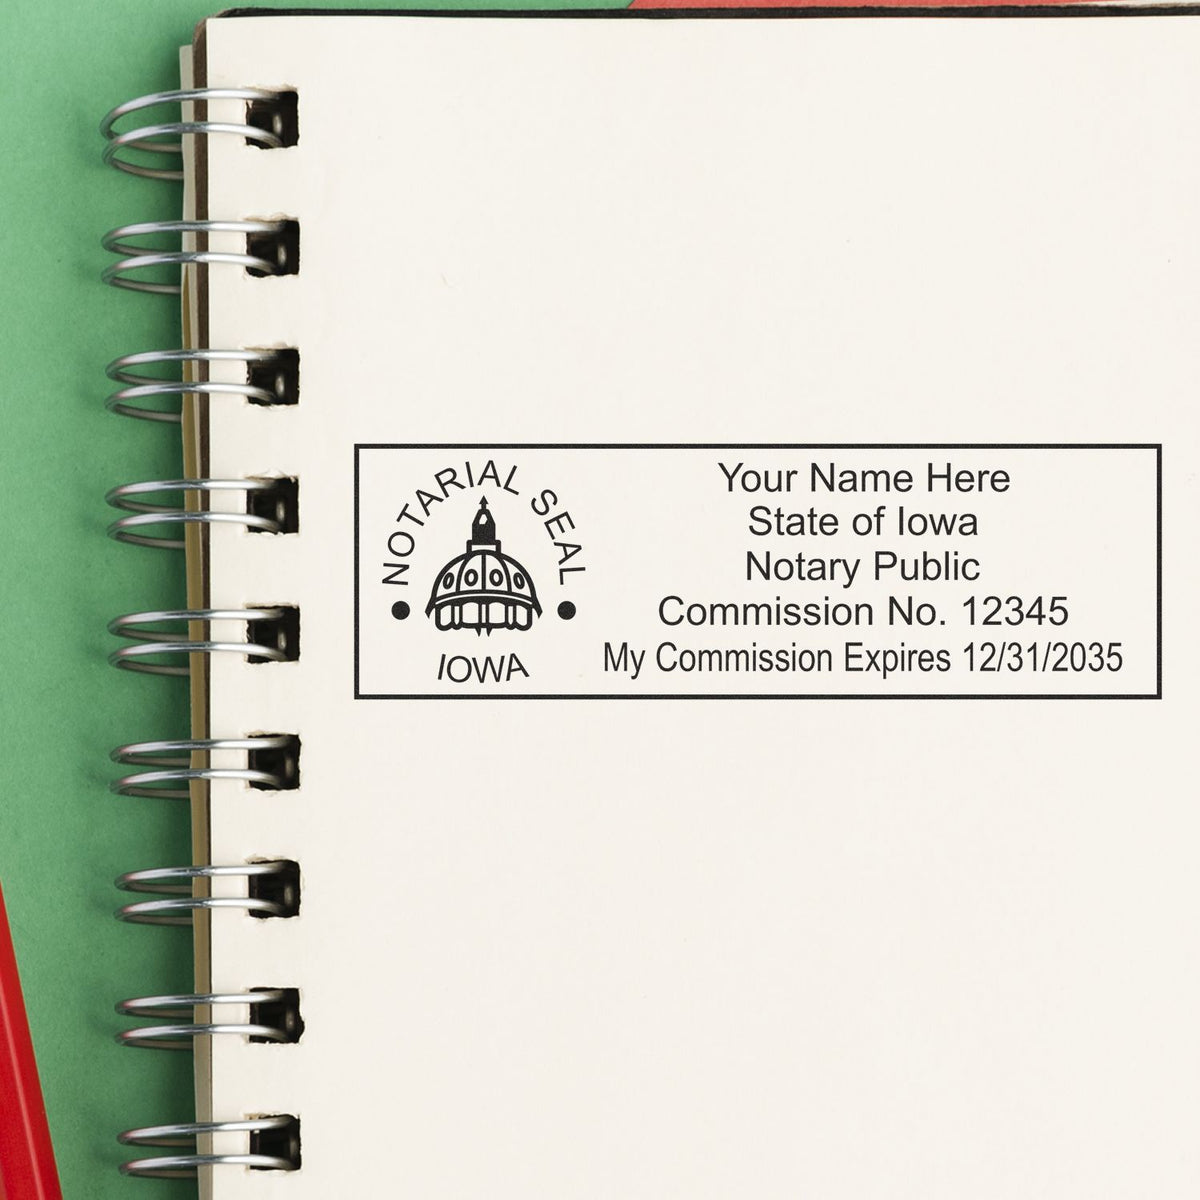 This paper is stamped with a sample imprint of the Super Slim Iowa Notary Public Stamp, signifying its quality and reliability.